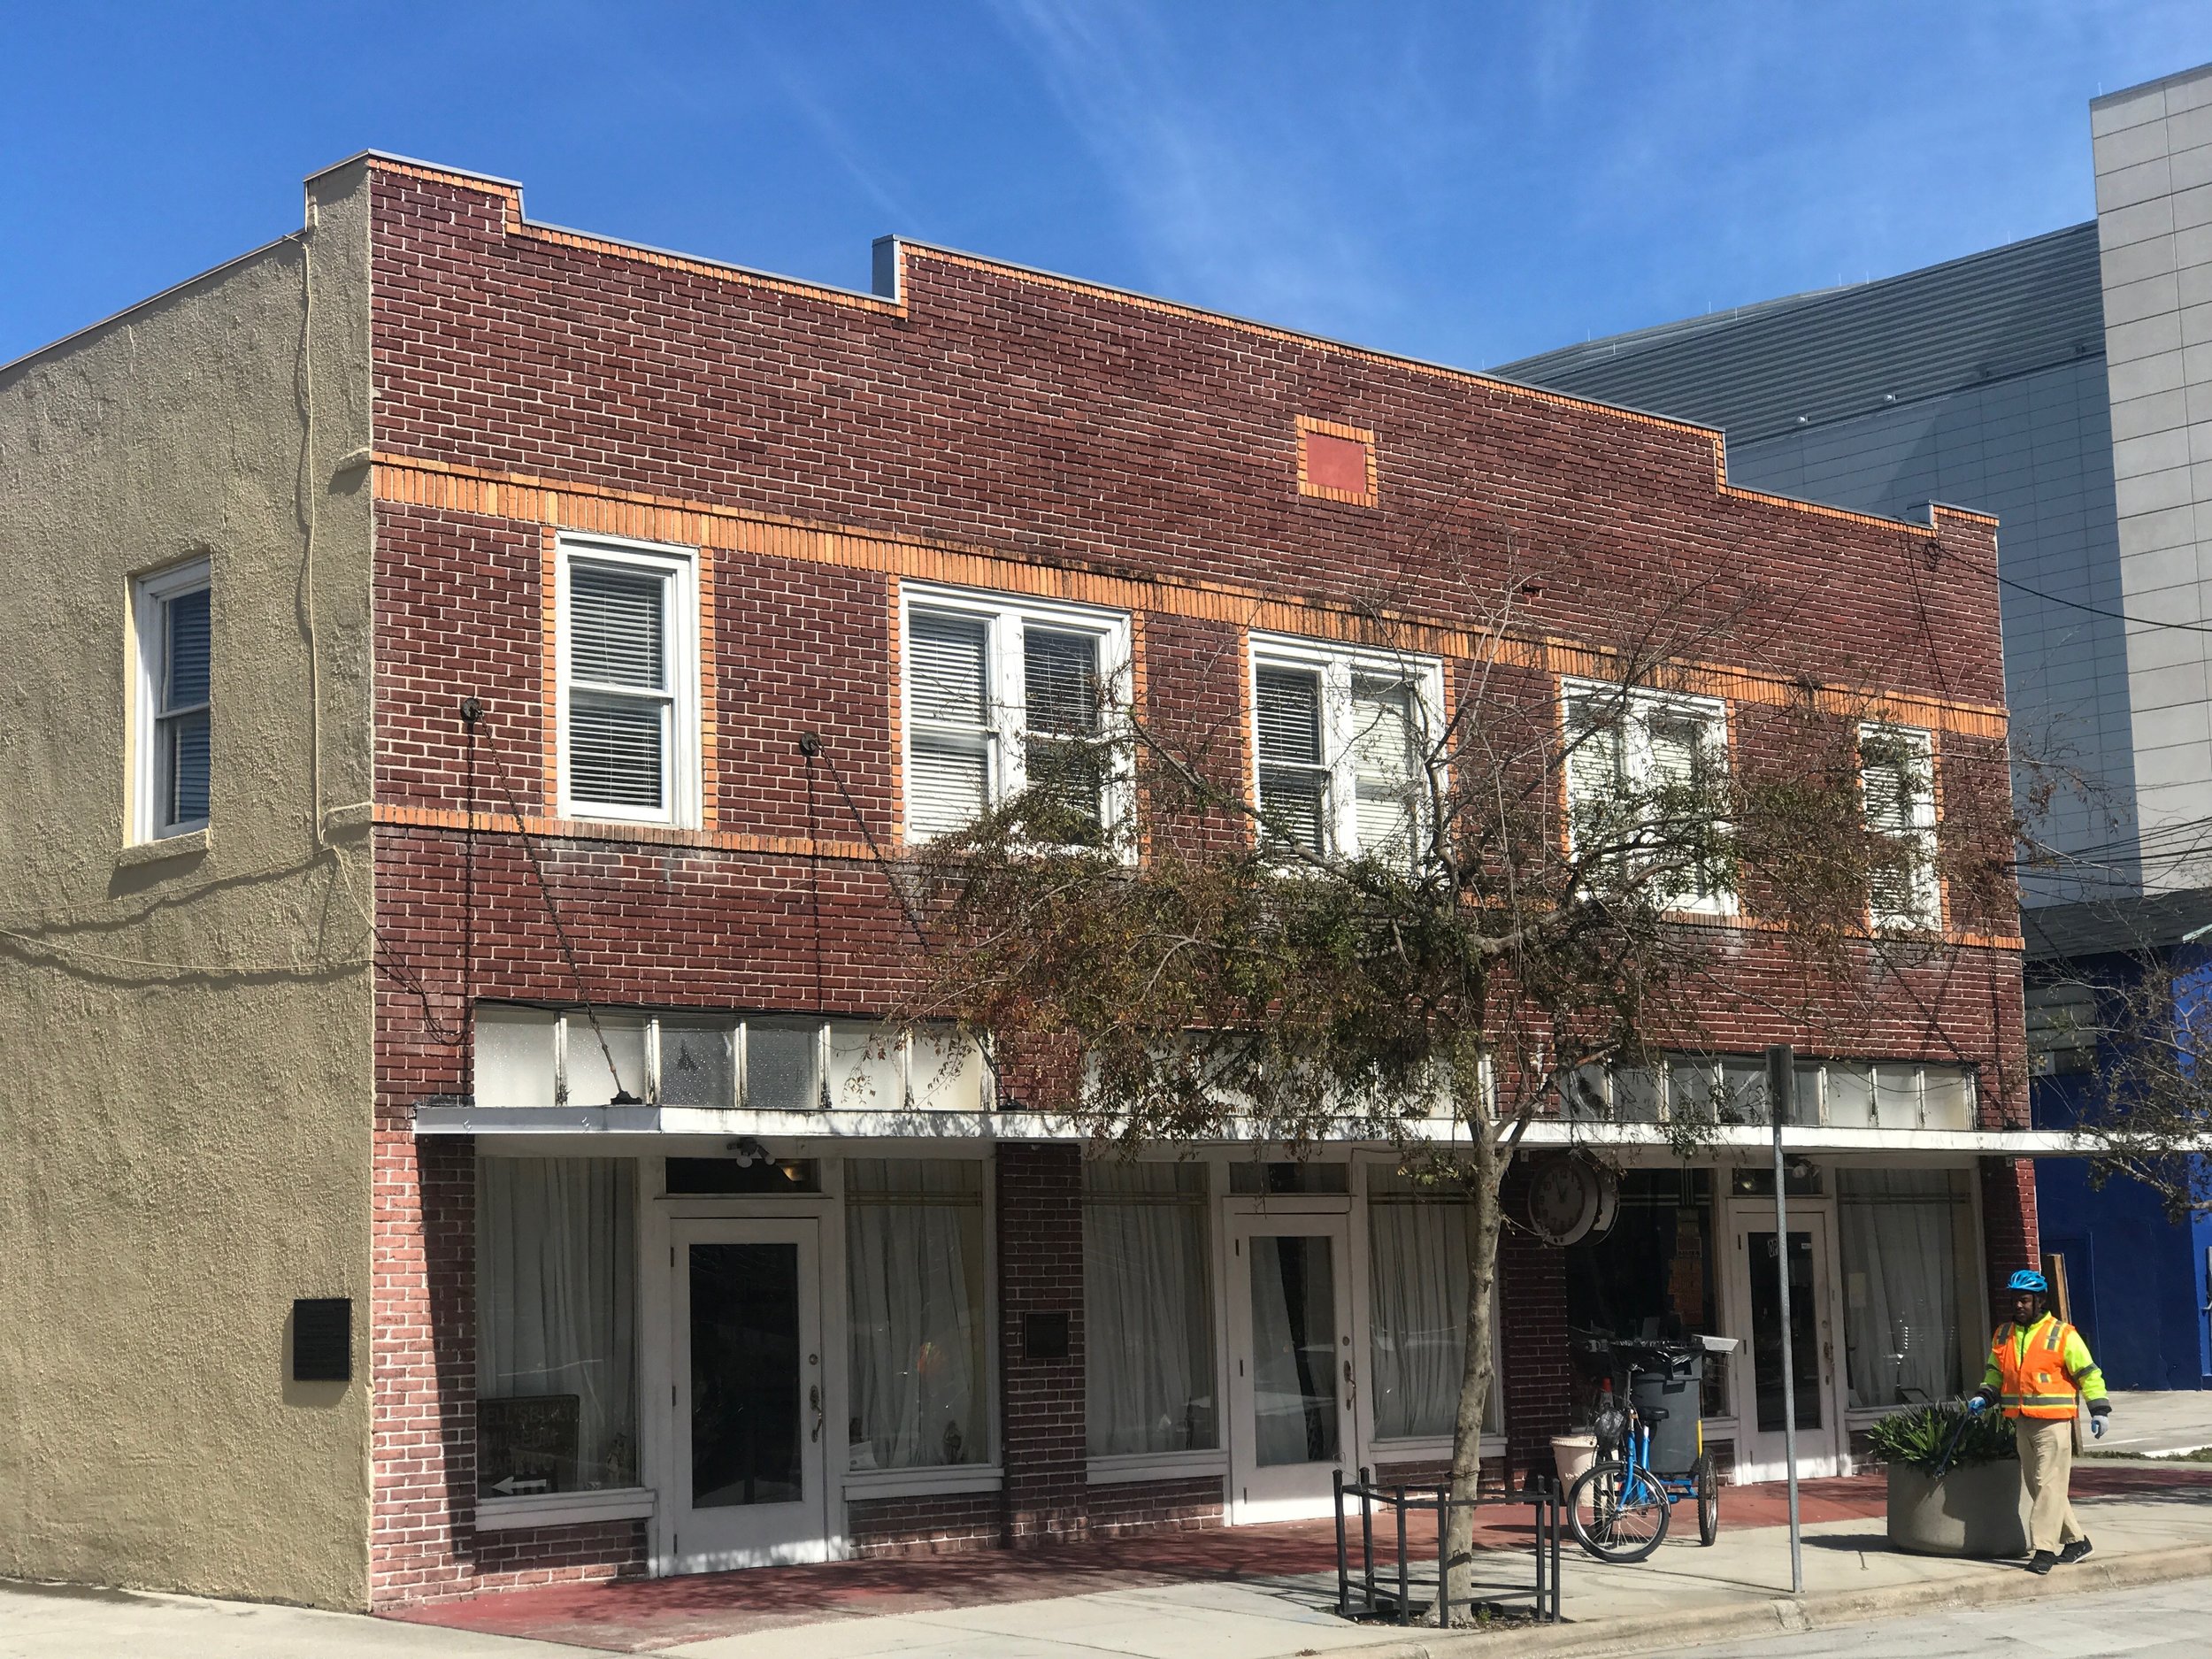  The Wells’Built Hotel in Orlando’s Parramore neighborhood now houses a museum of African American history and culture.      